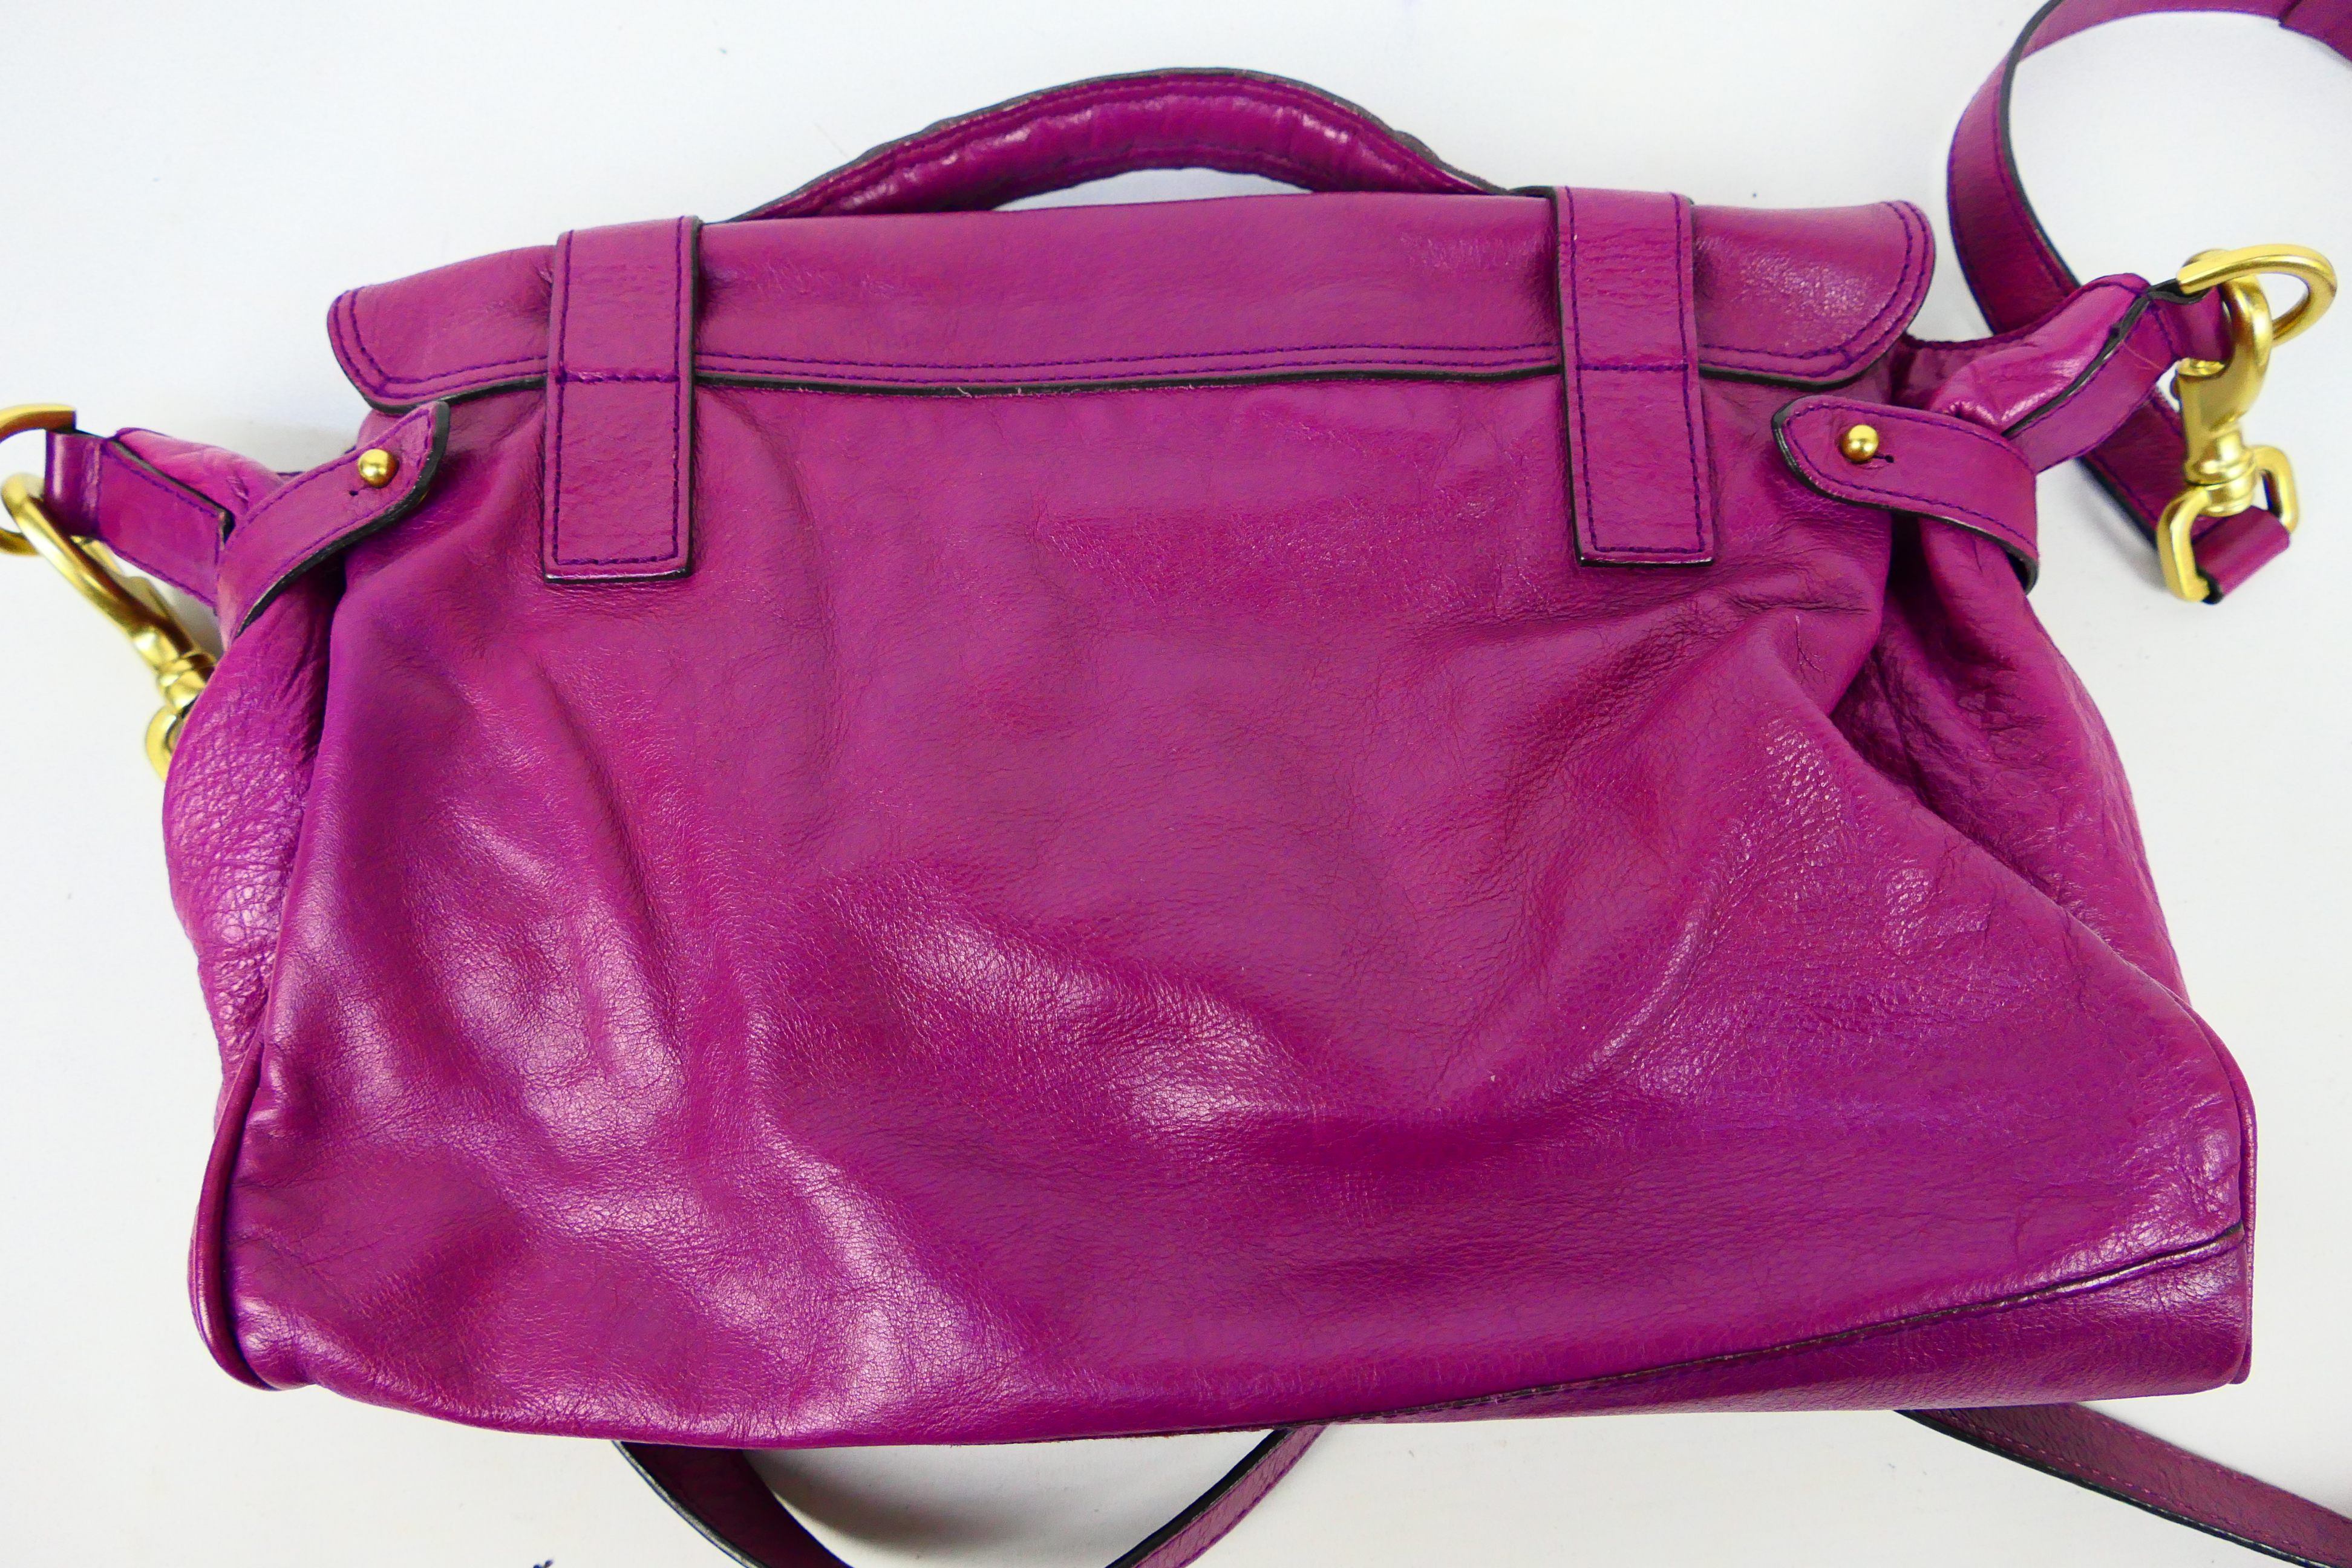 Mulberry - A raspberry Mulberry leather handbag - Handbag has one interior zip pocket and one pouch. - Image 6 of 9